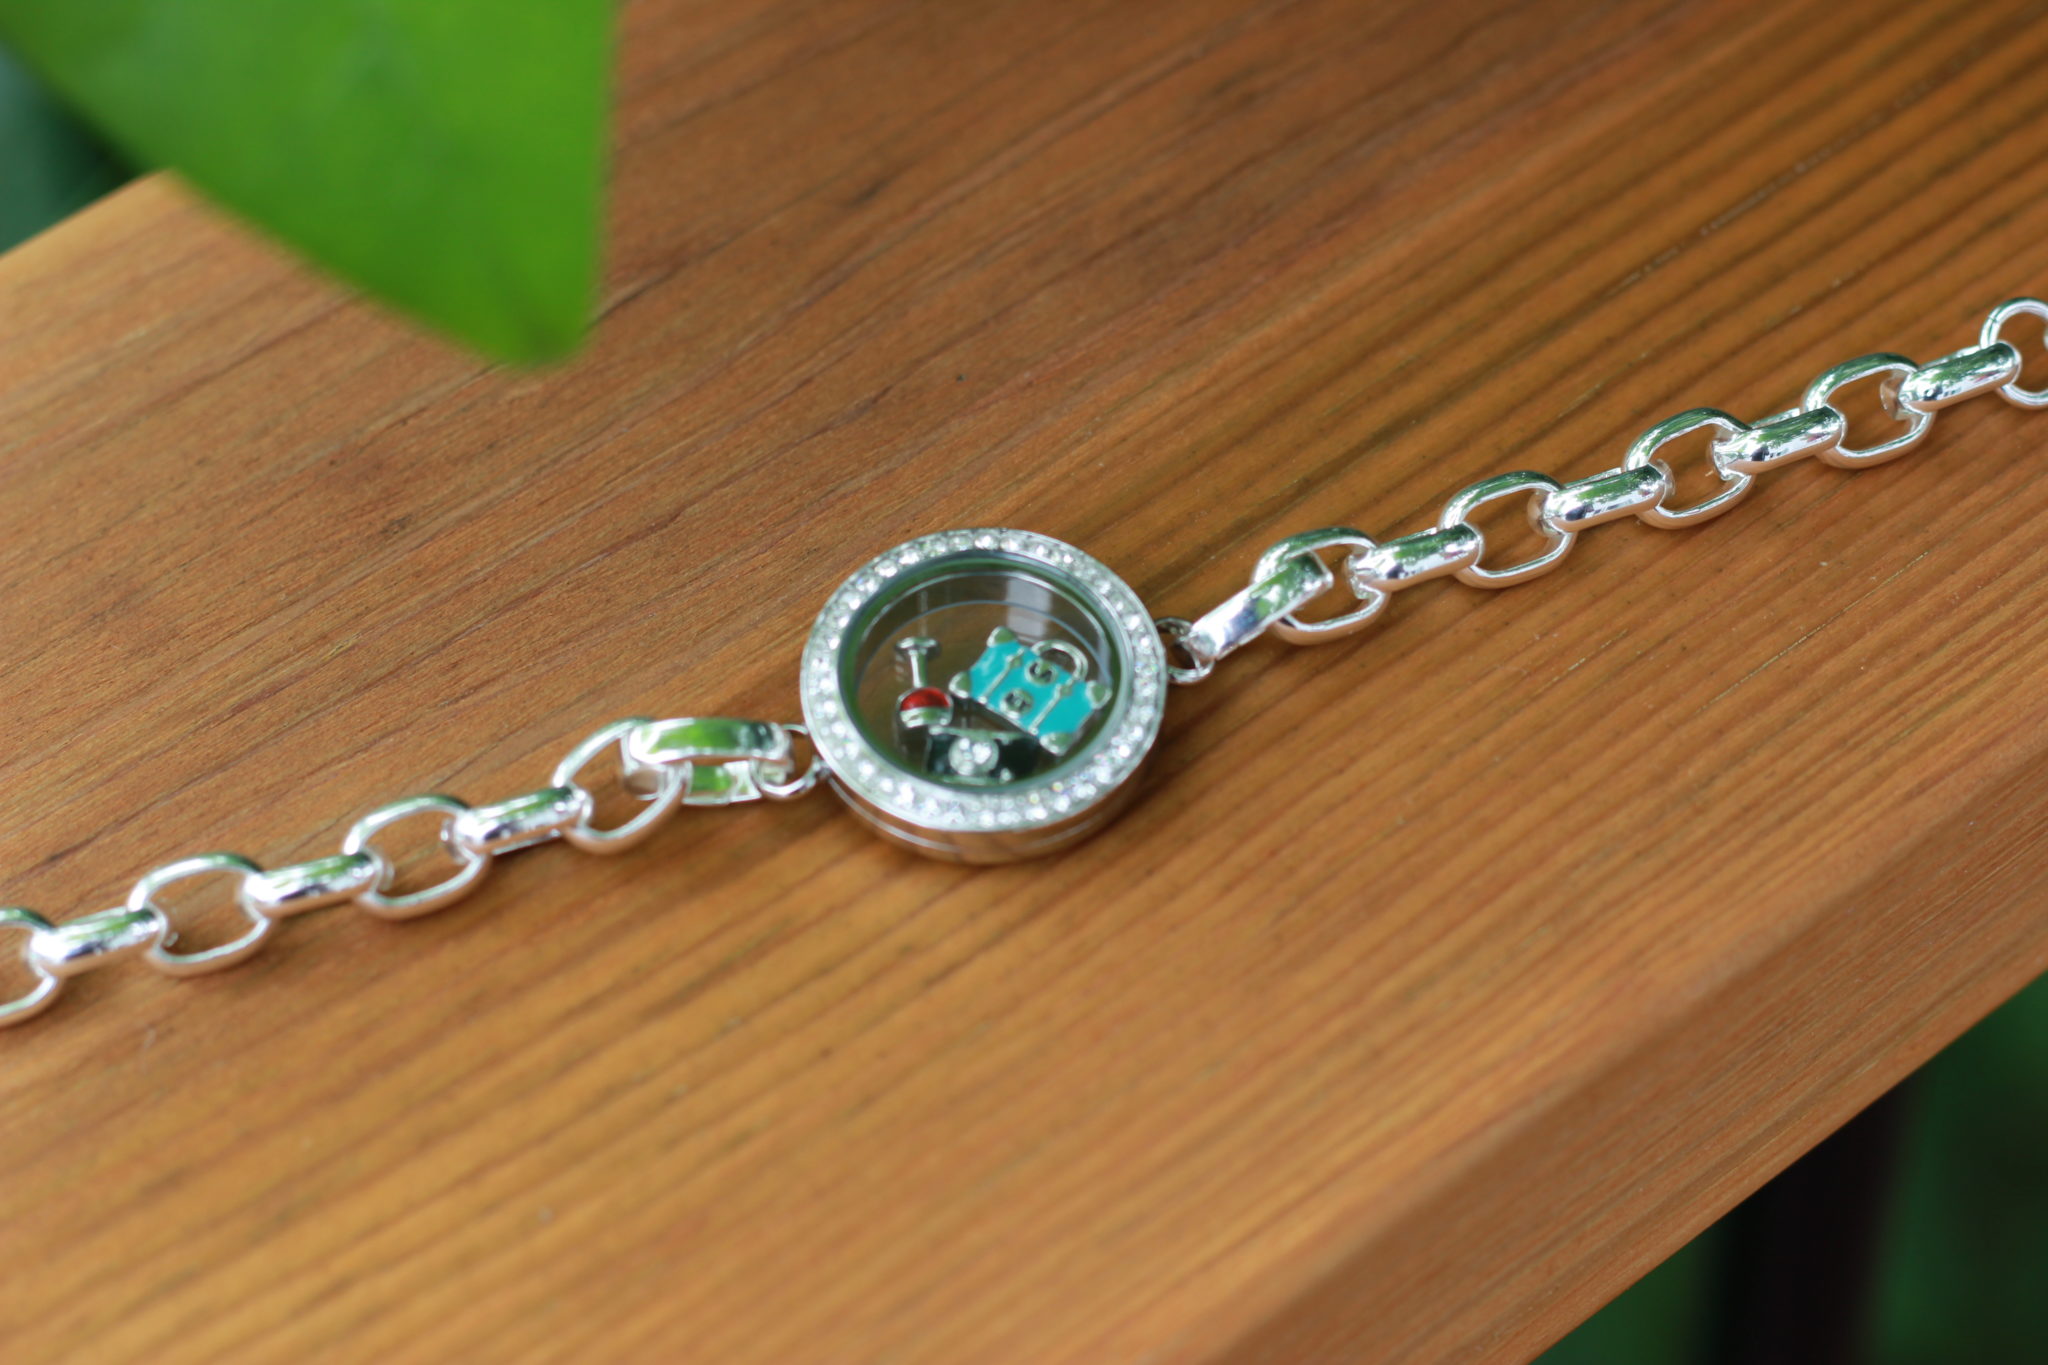 Origami Owl Review & Giveaway